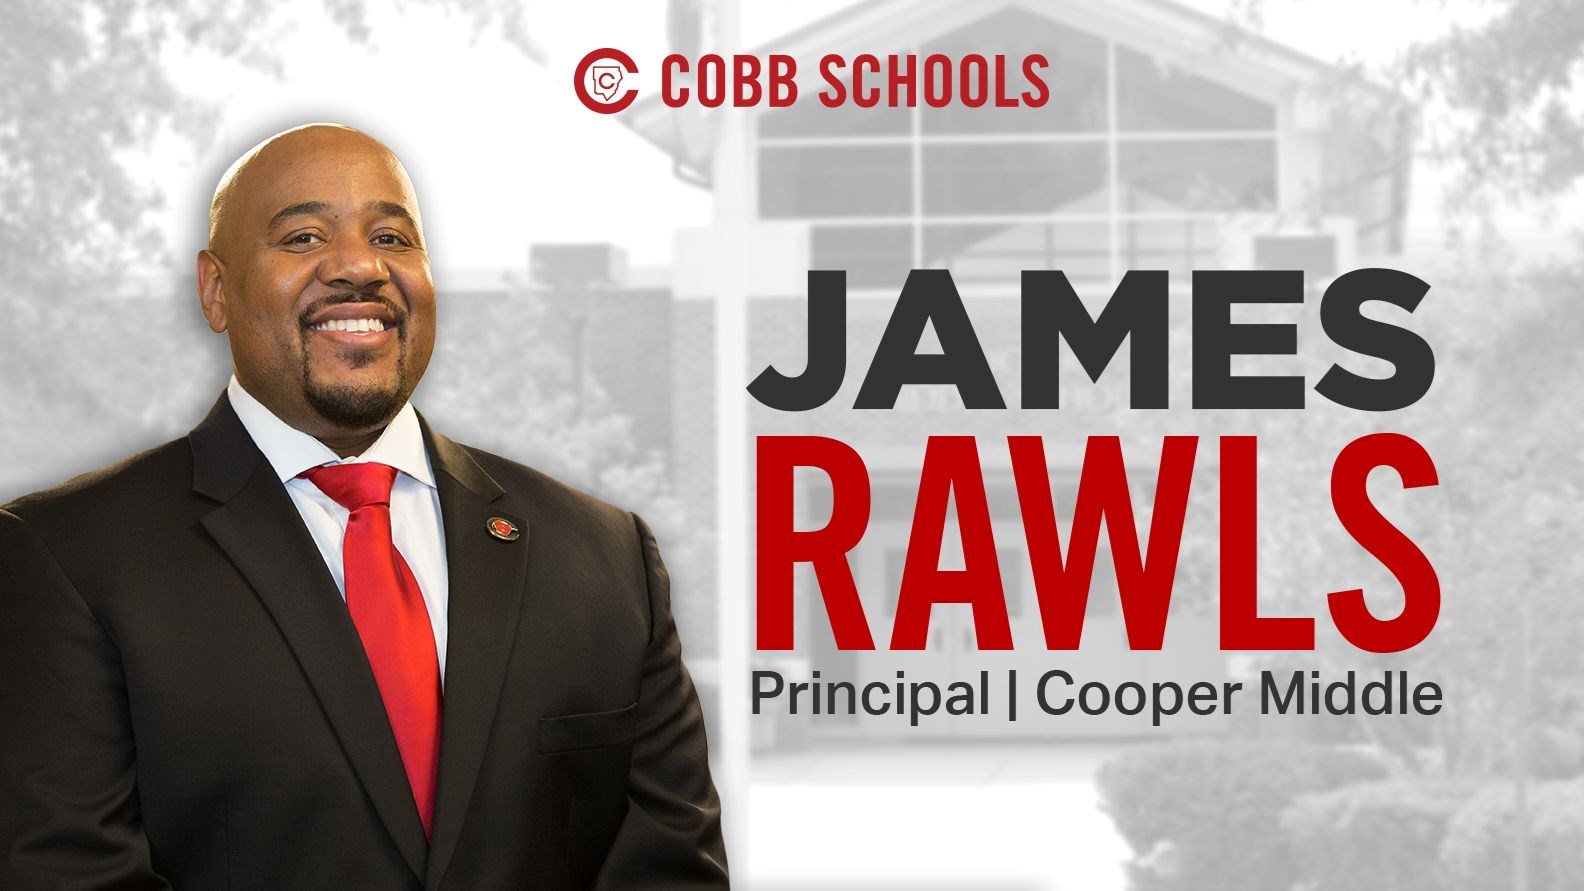 James Rawls will serve as principal at Cooper Middle School.